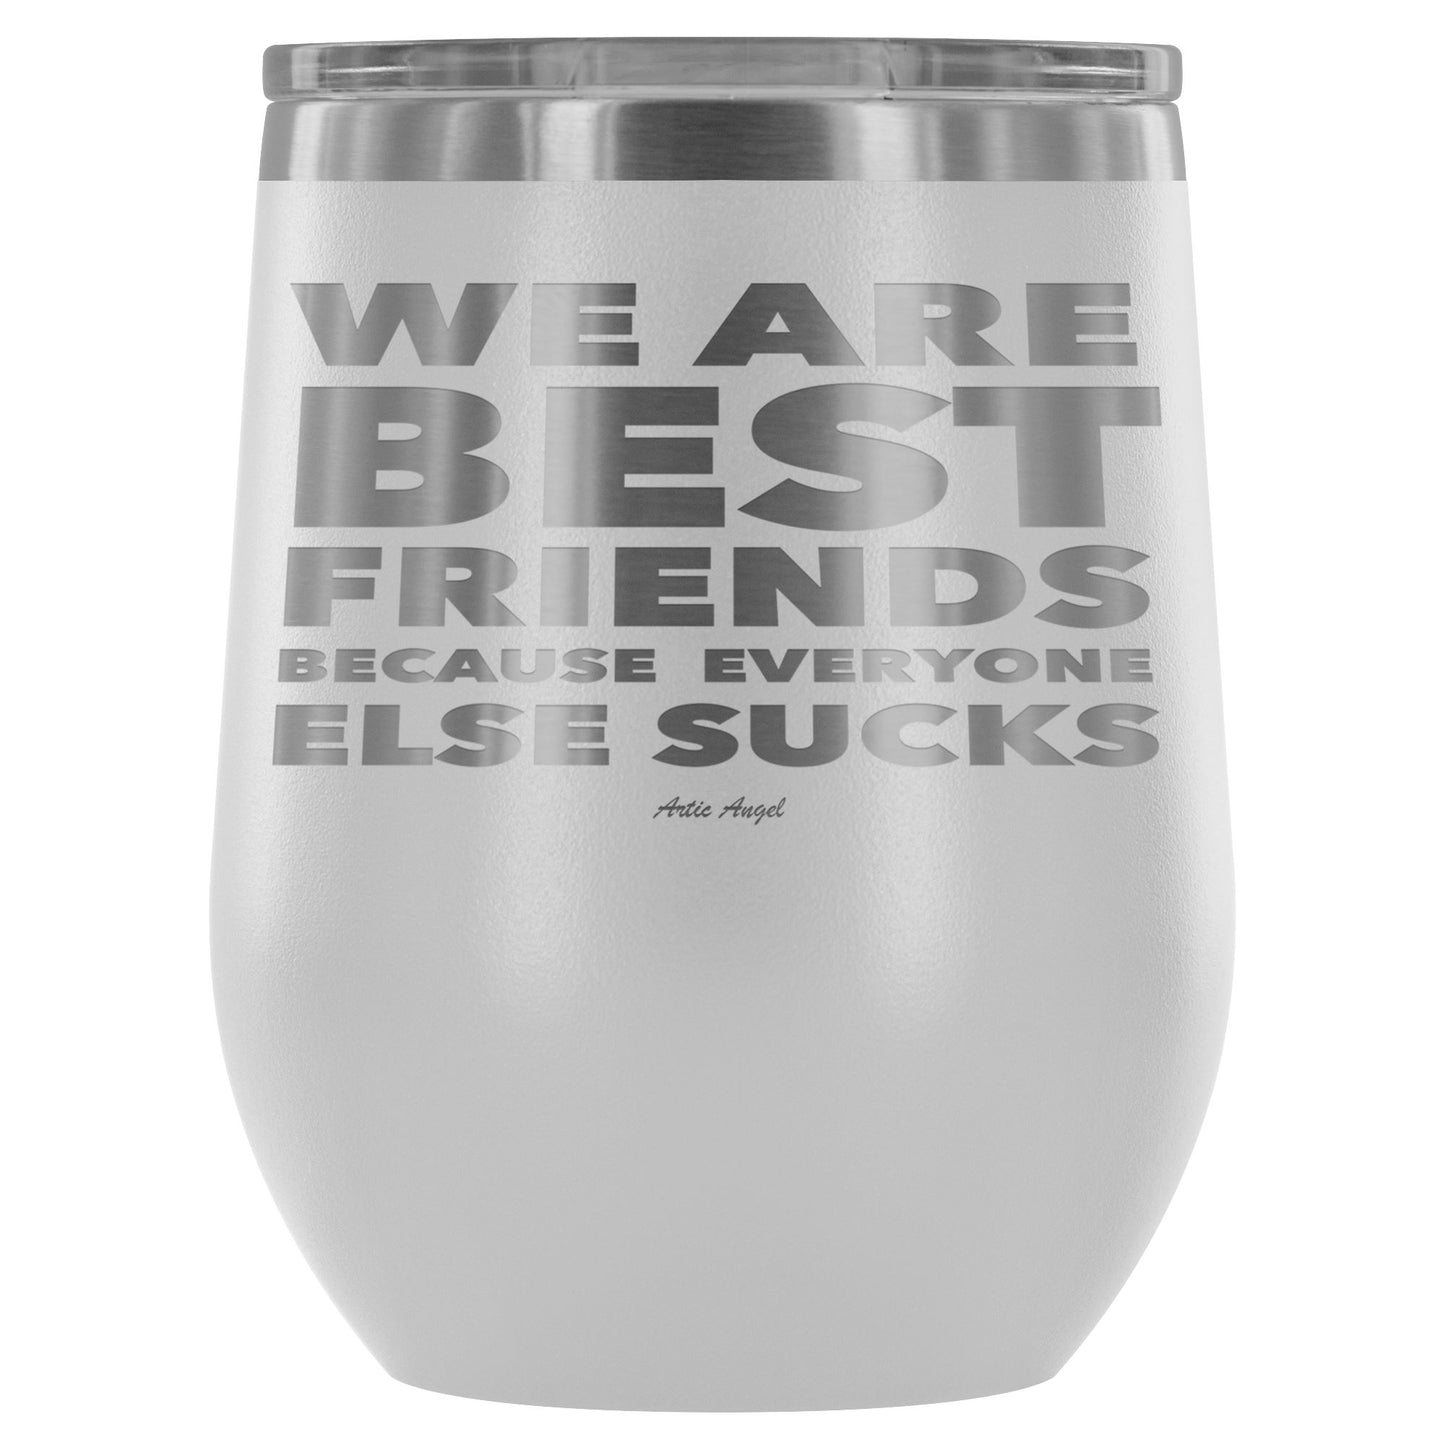 "We Are Best Friends Because Everyone Else Sucks" Stainless Steel Wine Cup Wine Tumbler White 